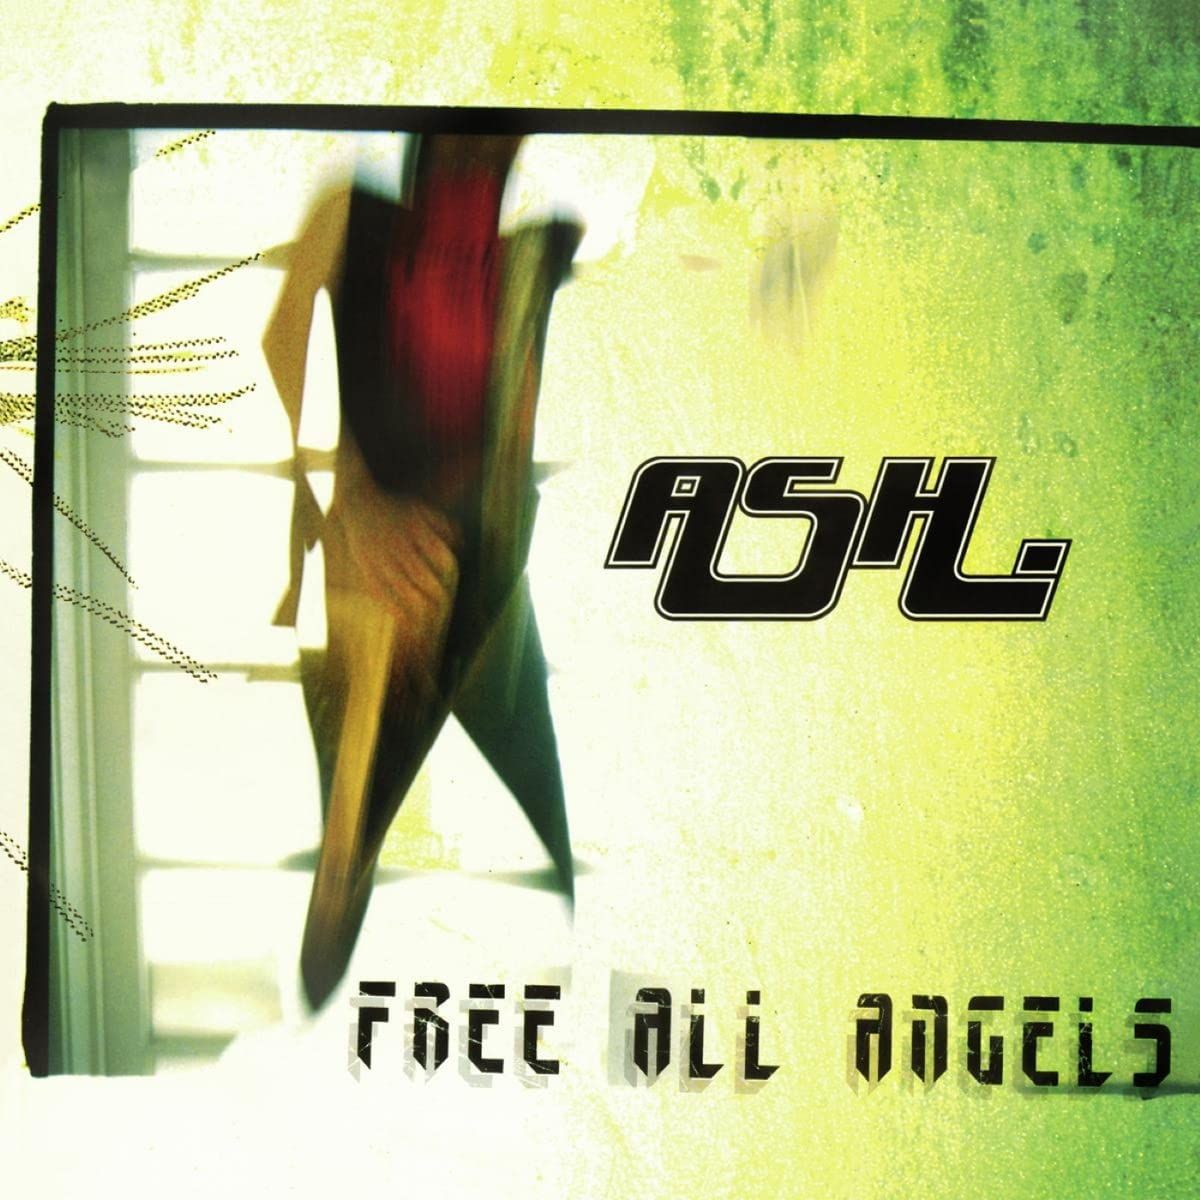 FREE ALL ANGELS